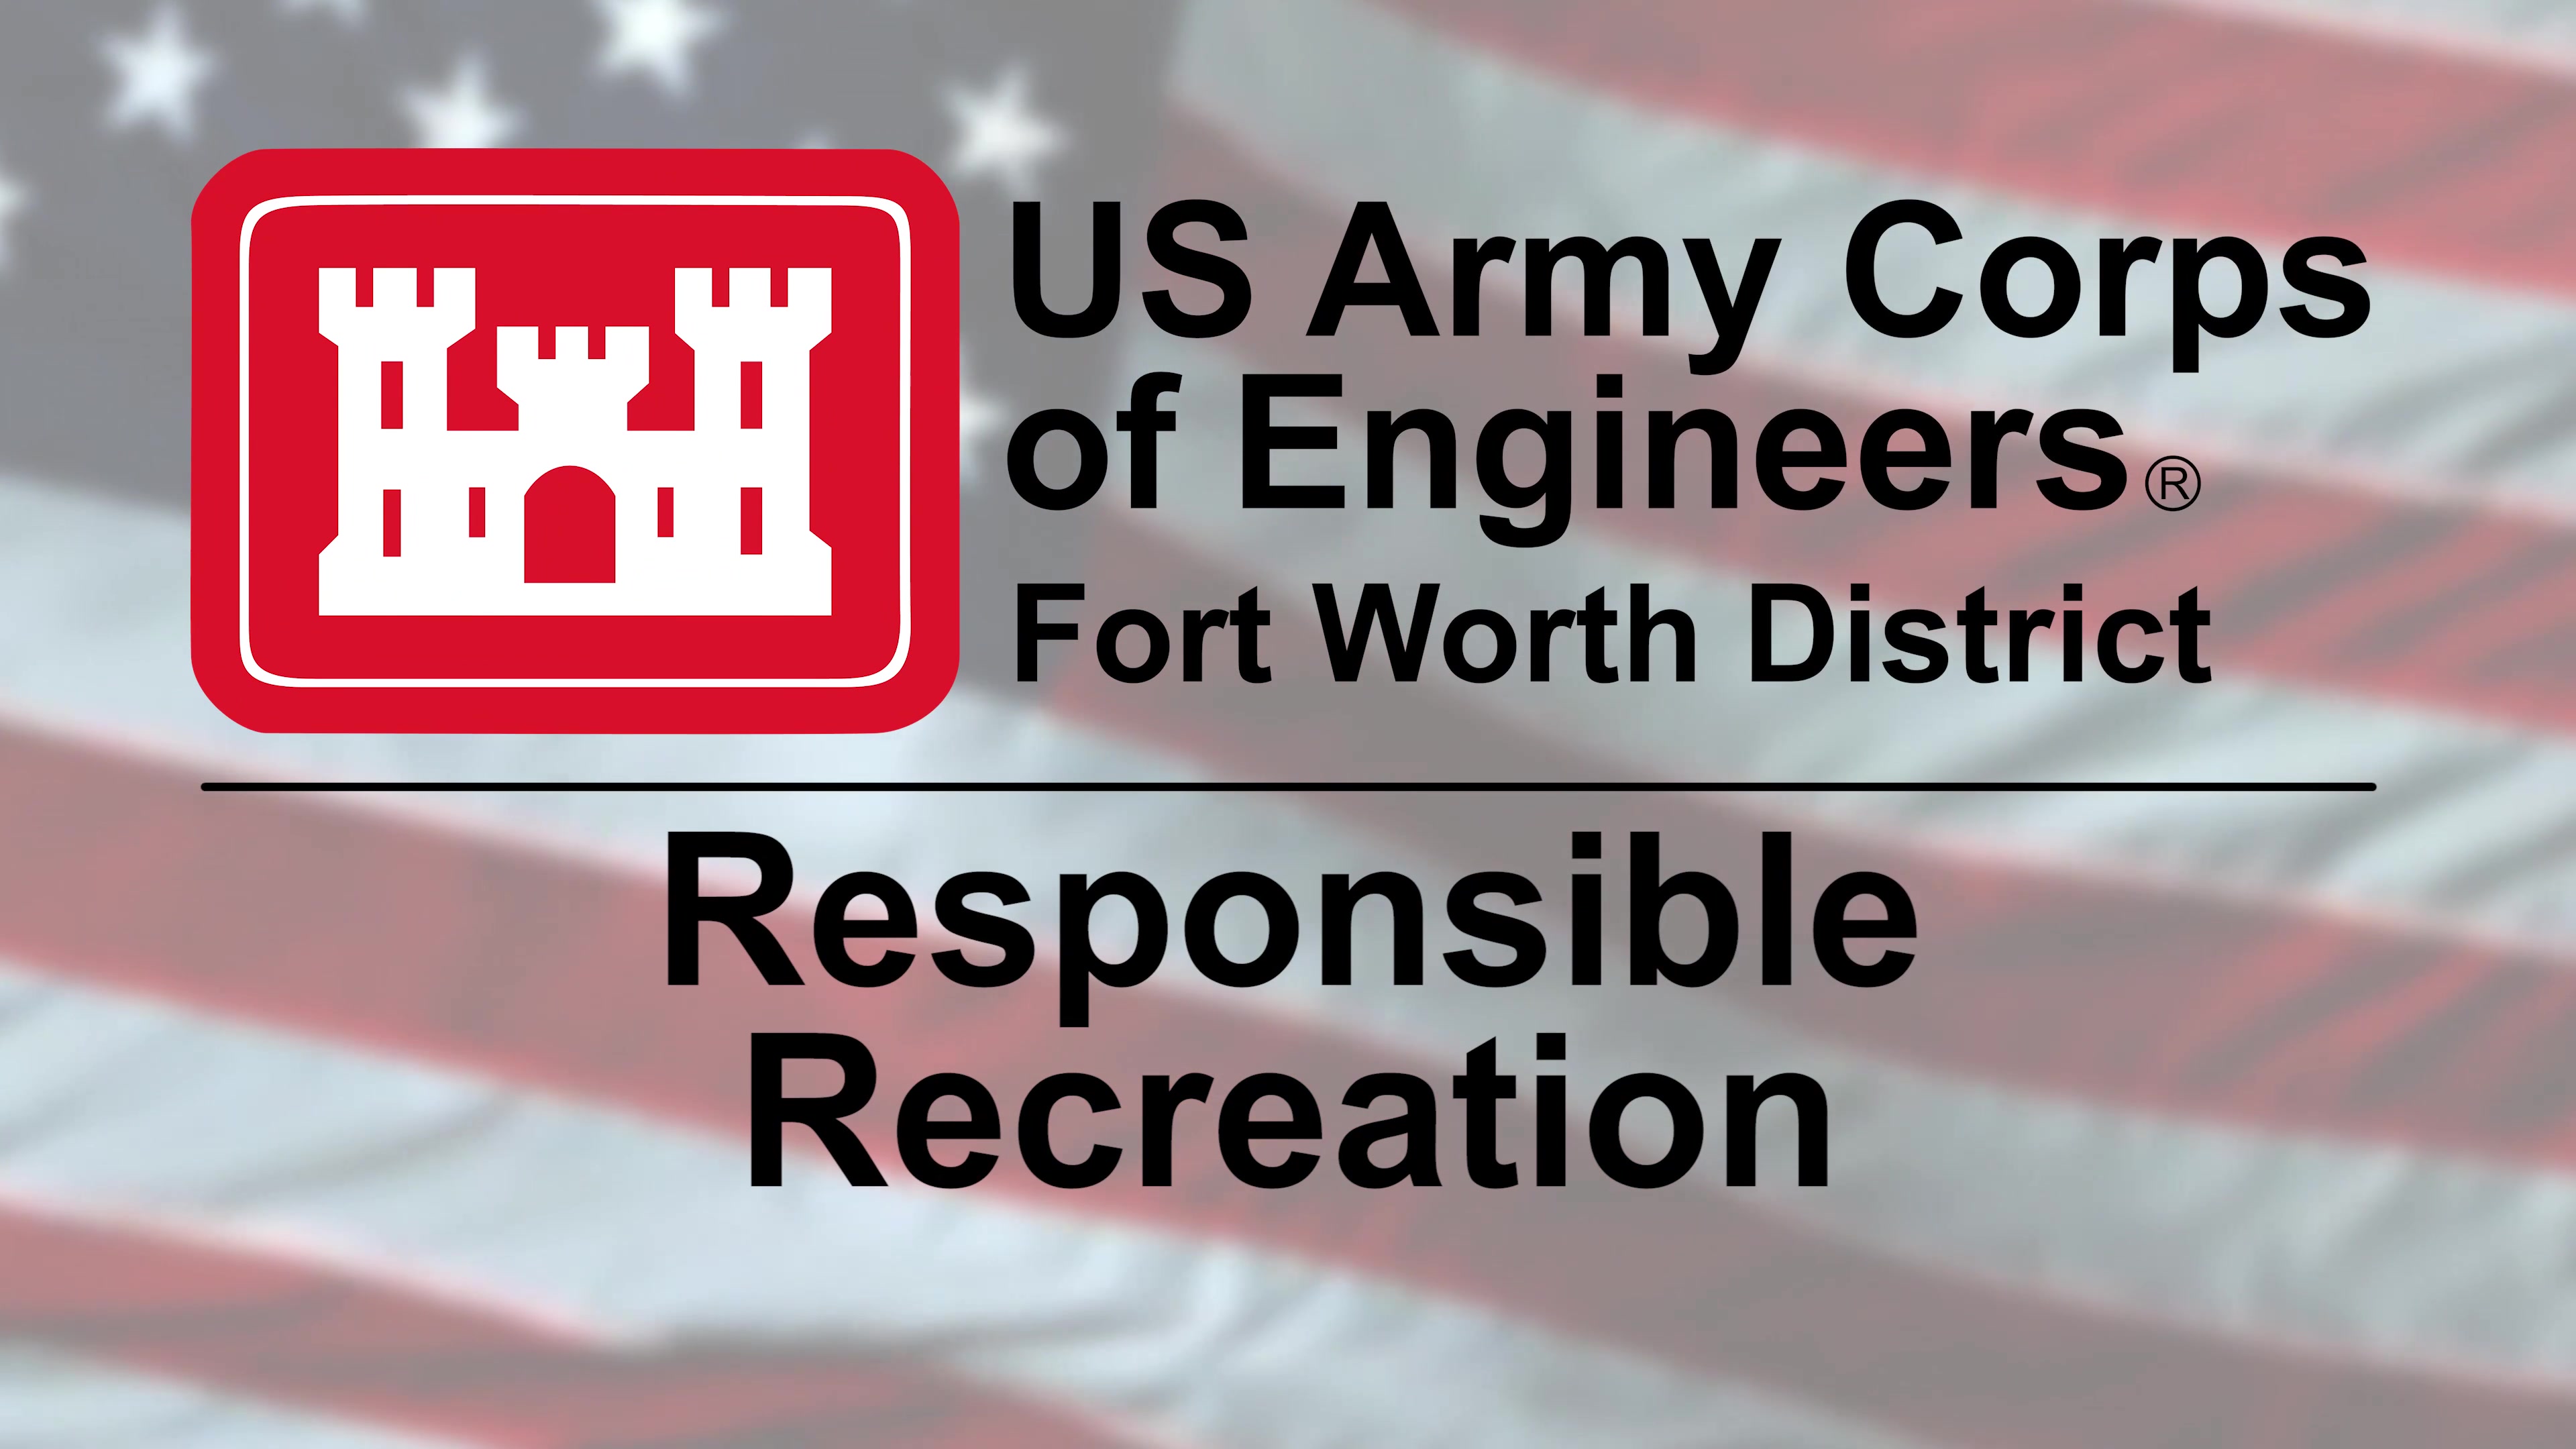 From every one at #USACE Fort Worth, we would like to remind our patrons to practice RESPONSIBLE RECREATION at the 25 lakes we offer. Leave no trace, stay safe, and see you at the lake!